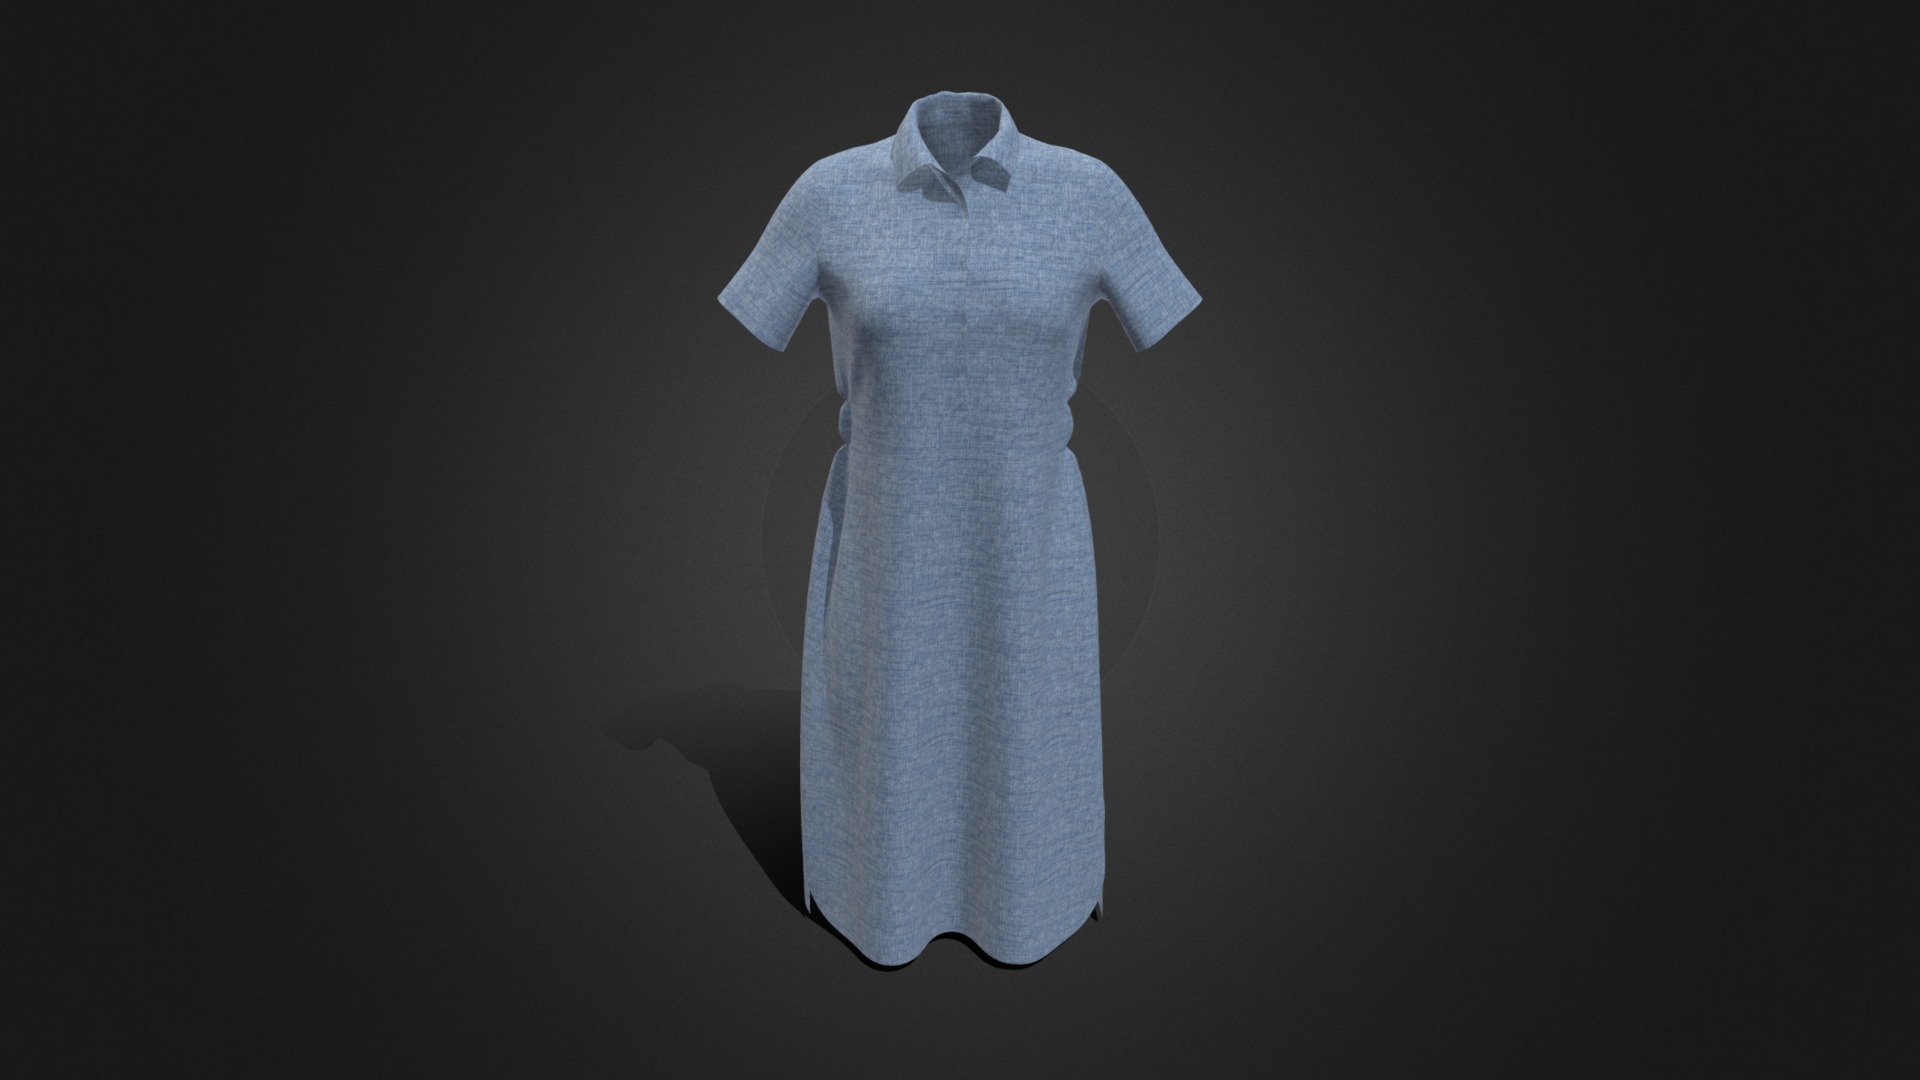 3D model Onepiece - This is a 3D model of the Onepiece. The 3D model is about a white dress on a mannequin.